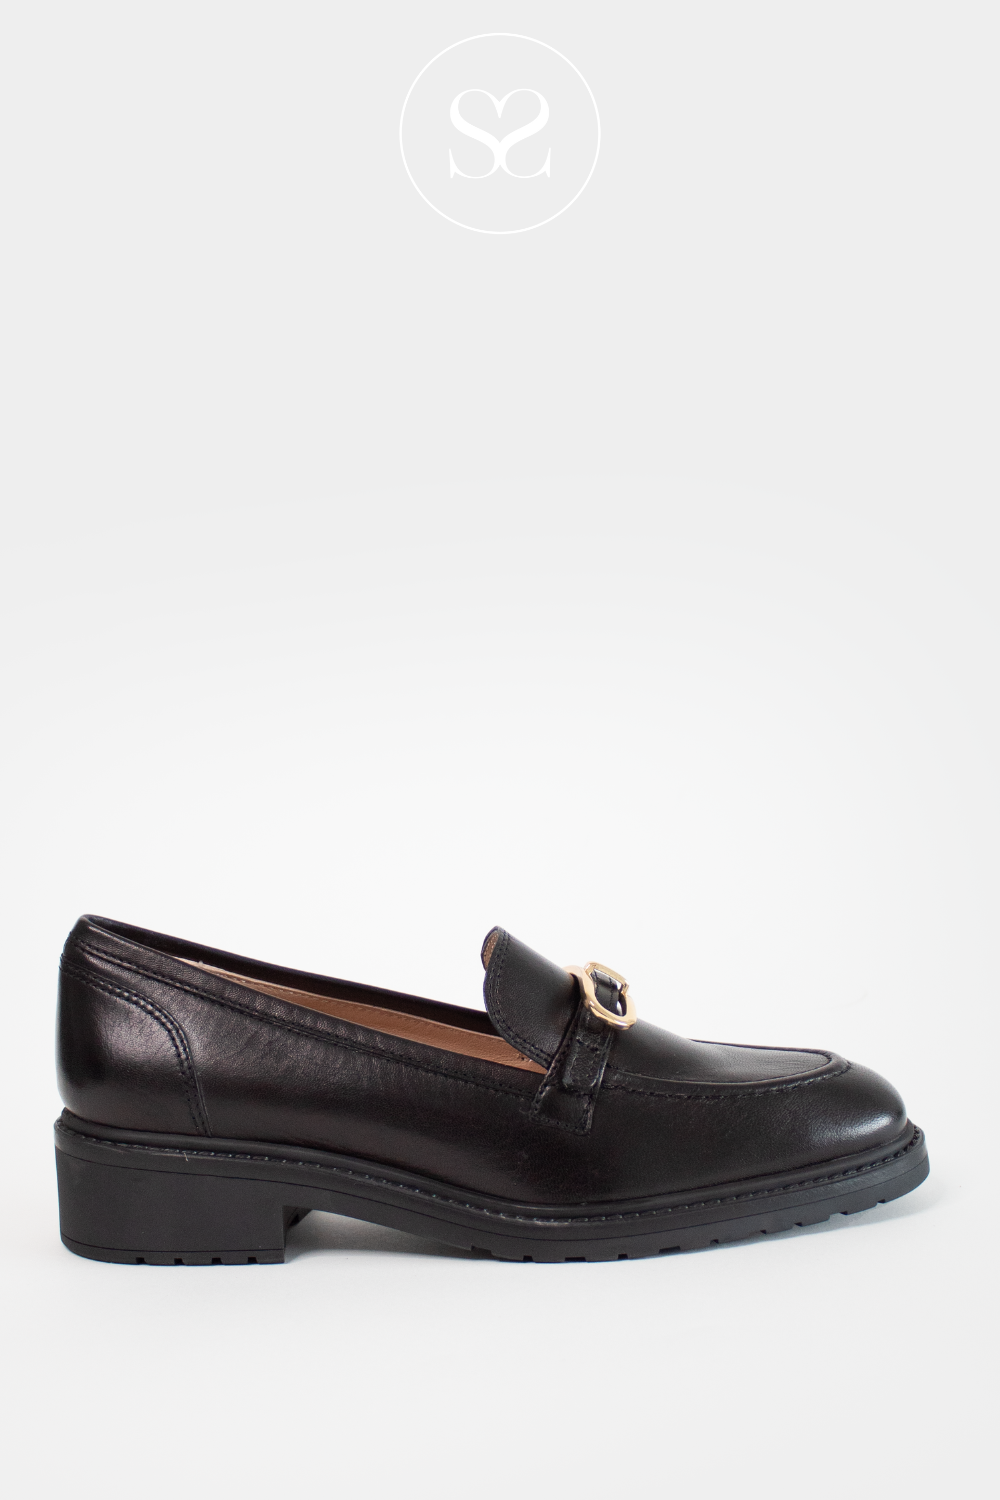 Chunky black loafers from Unisa, Ireland